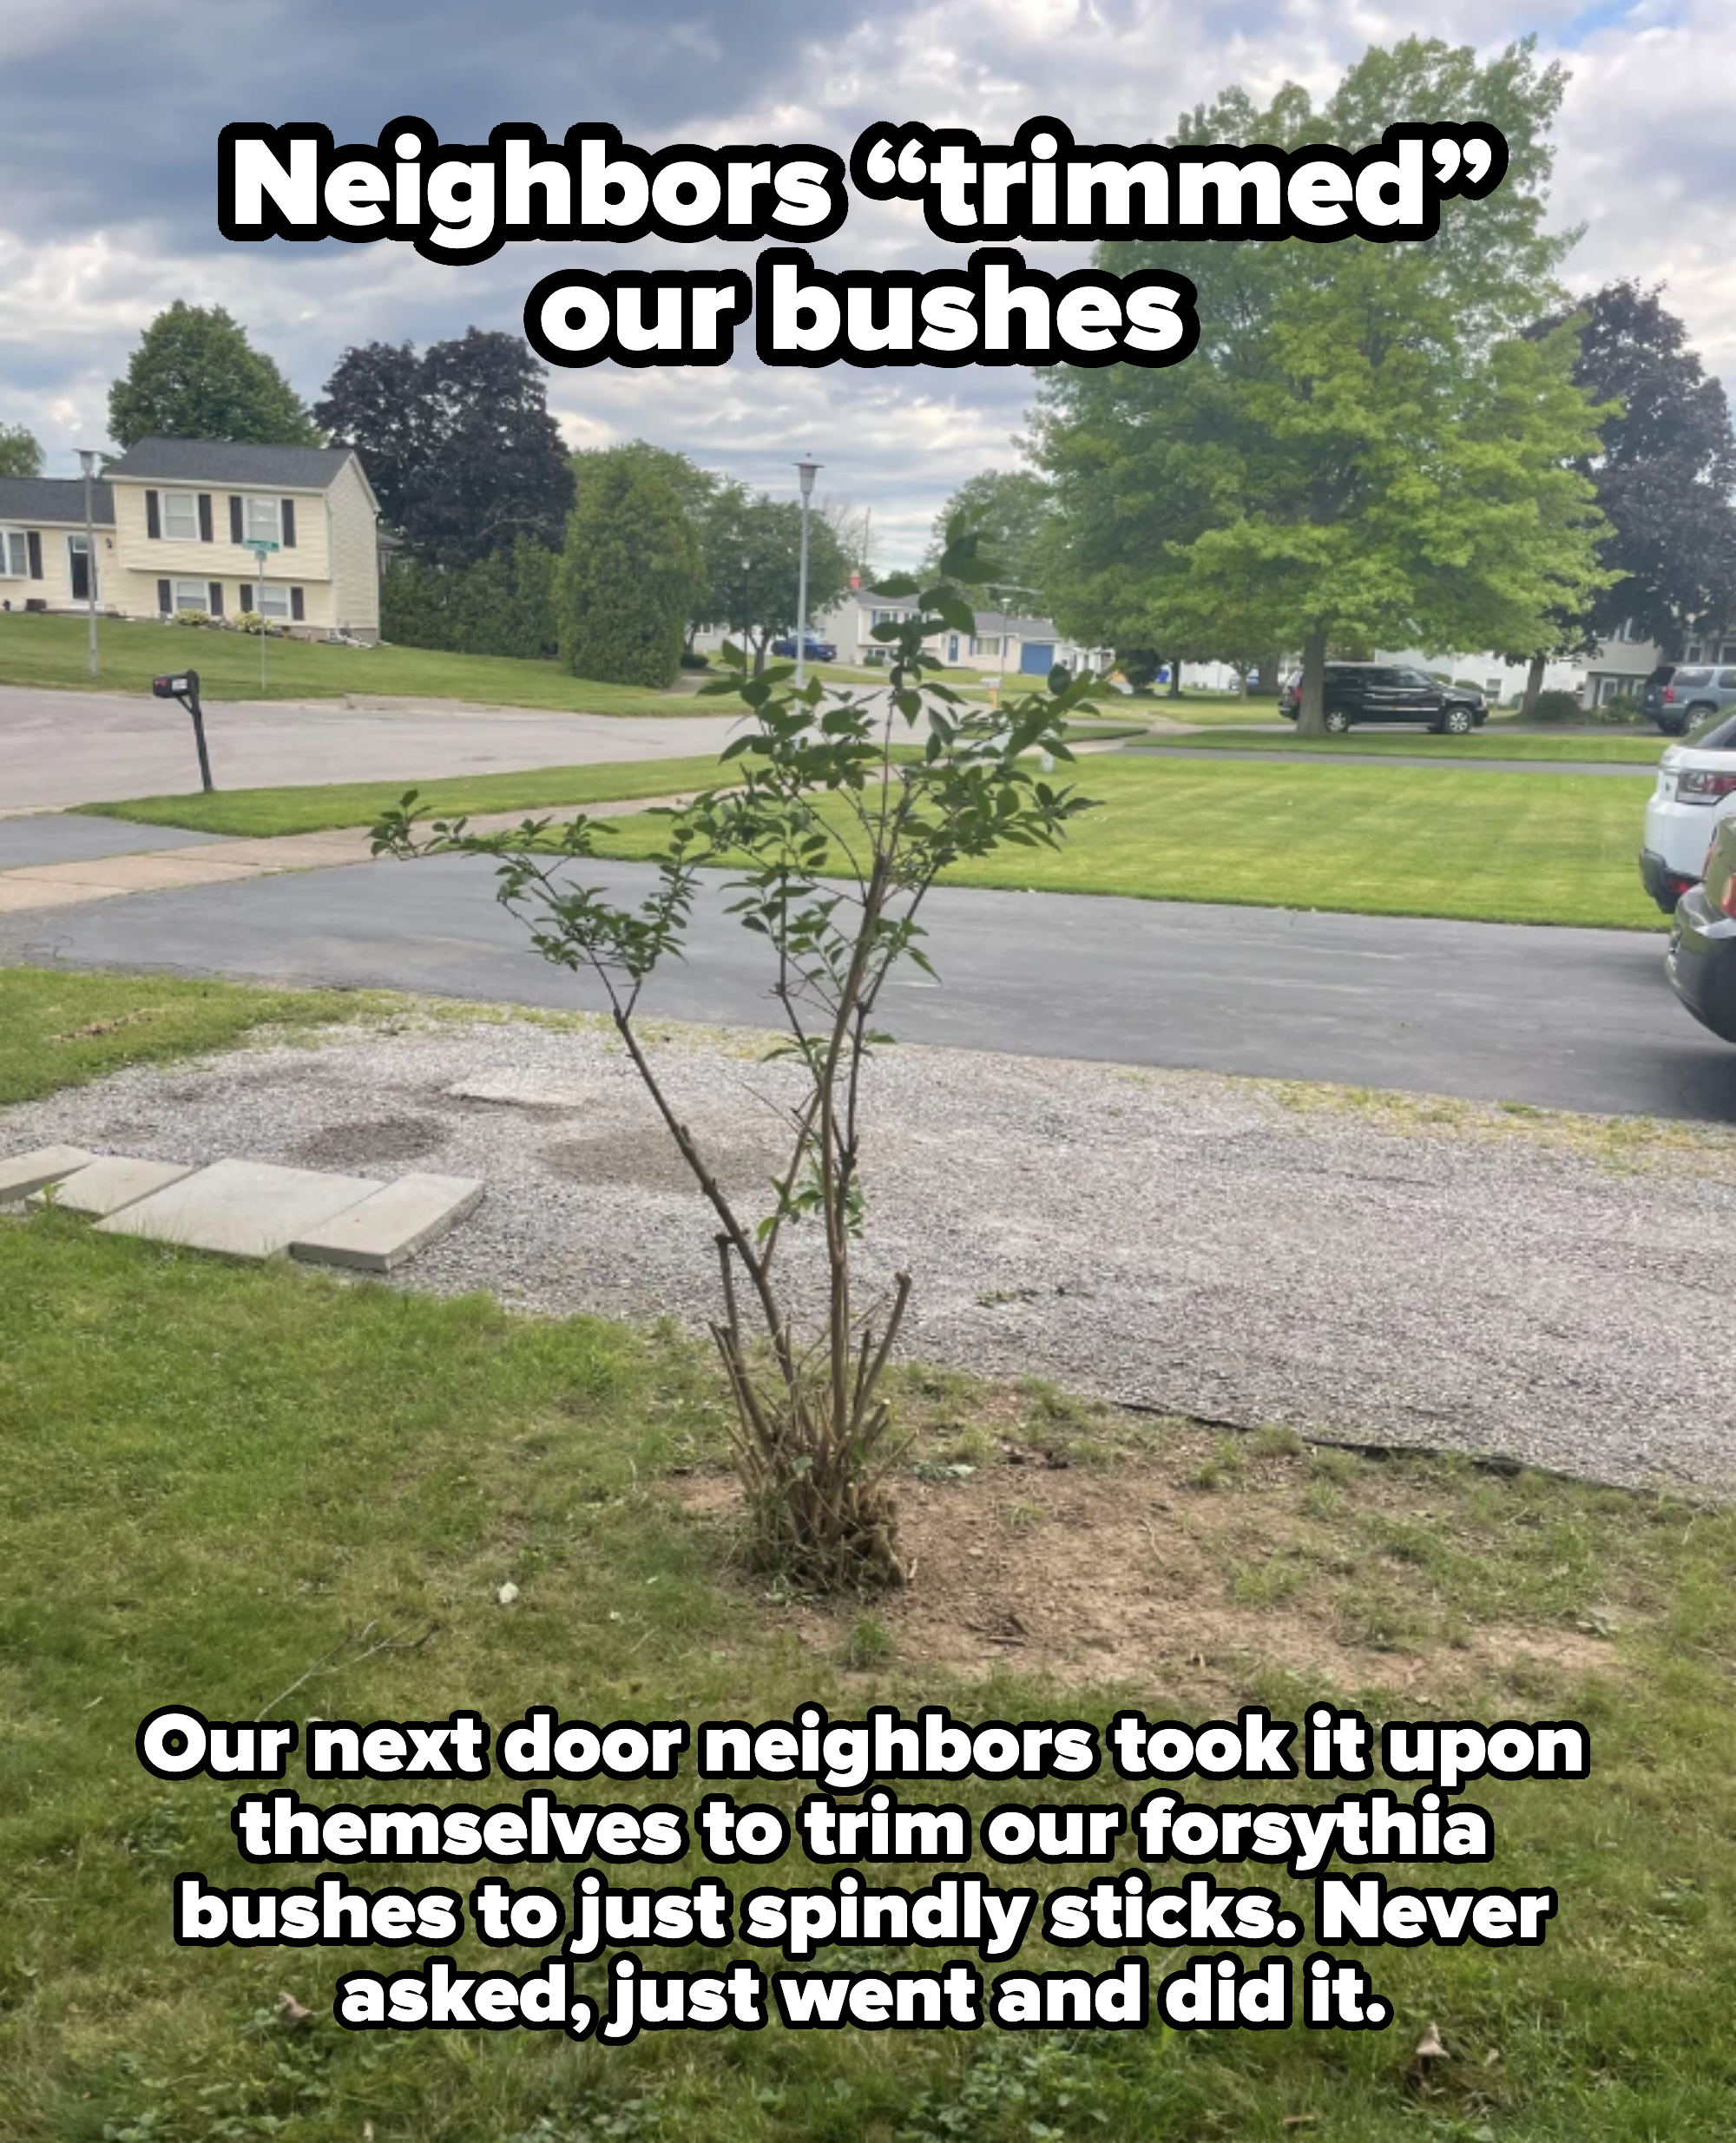 A small tree newly planted in a suburban front yard, with houses and parked cars in the background